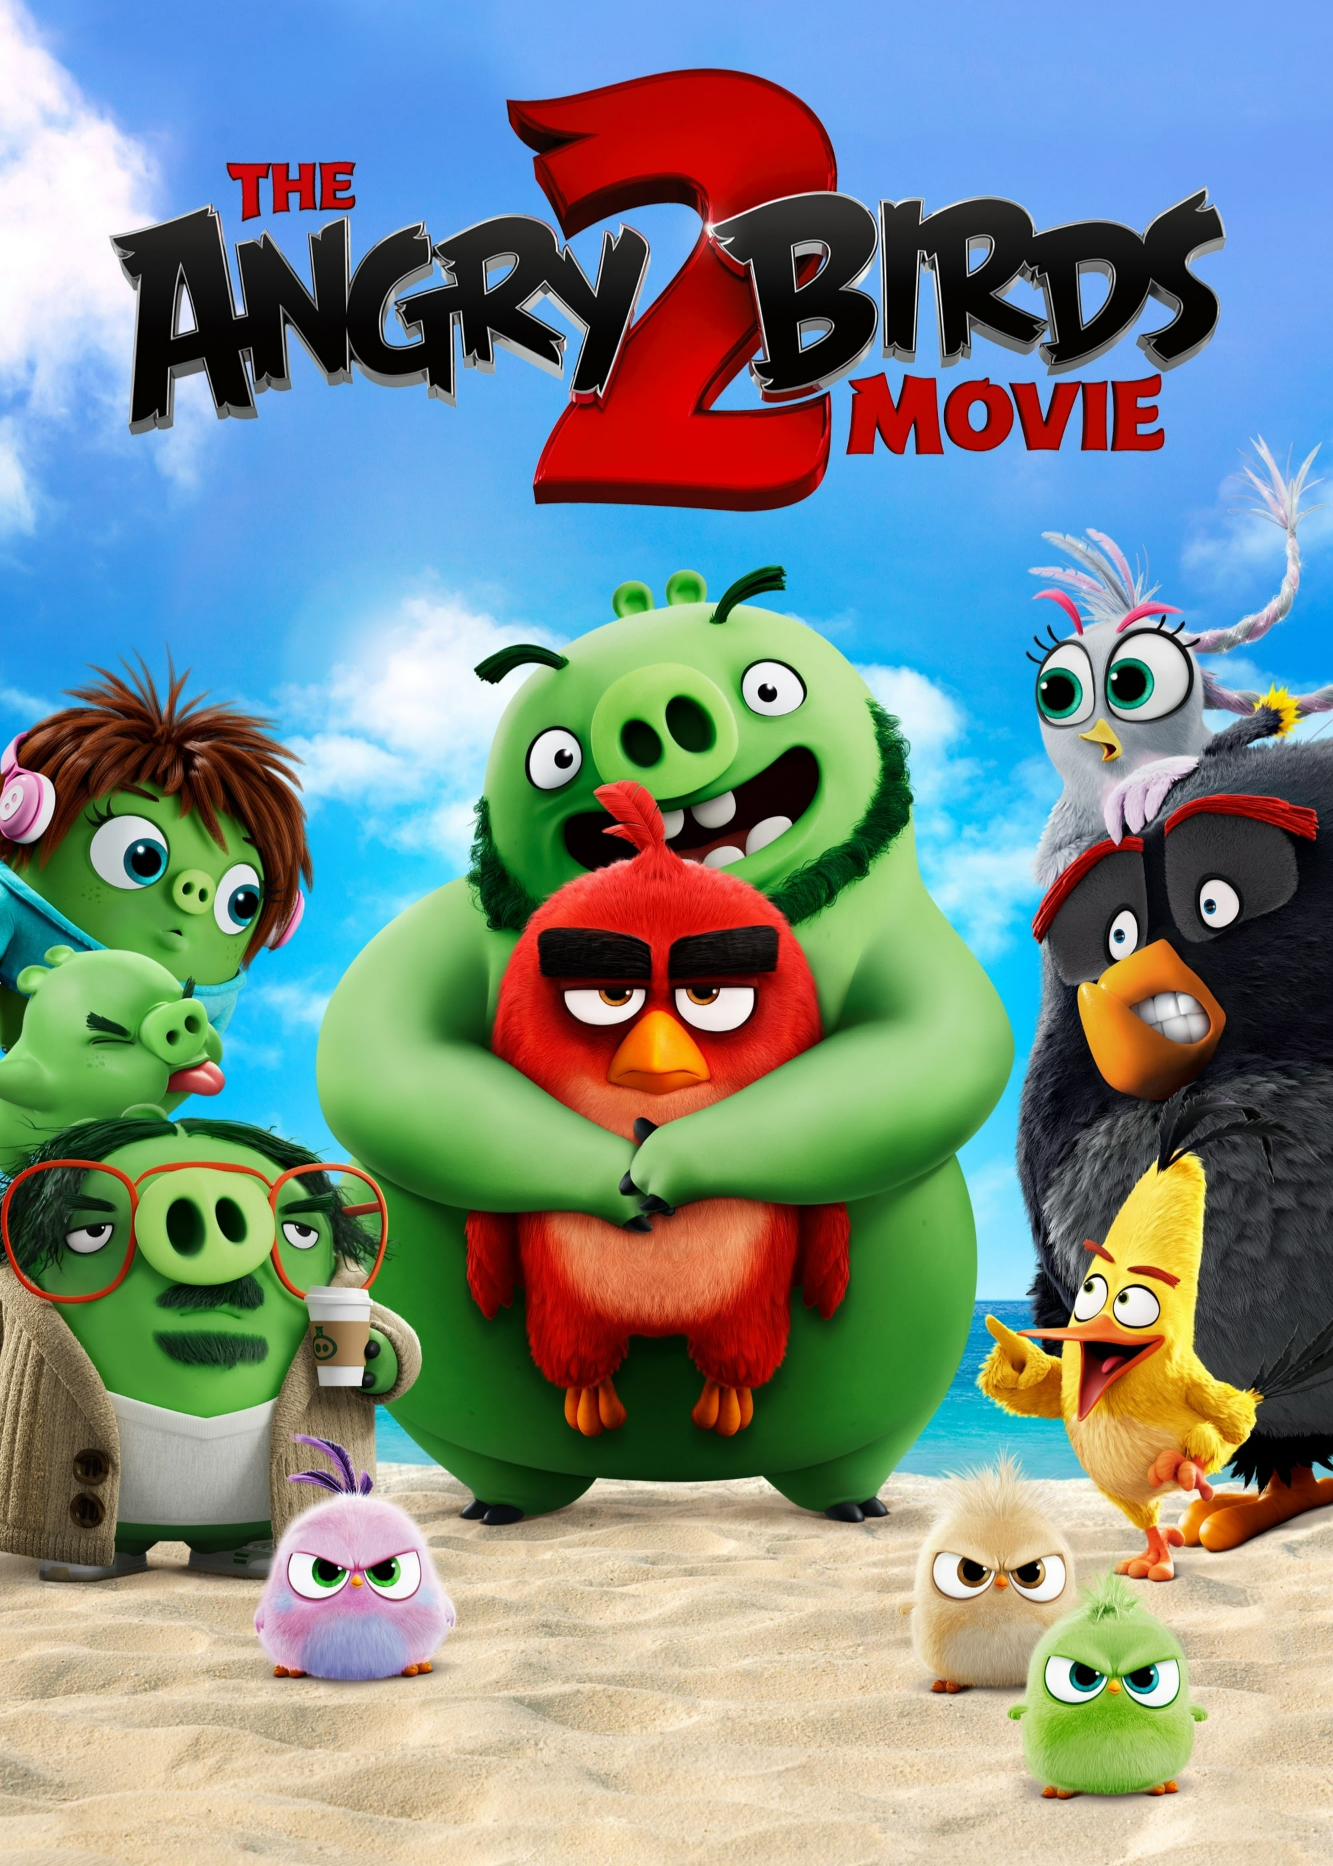 Poster Phim Phim Angry Birds 2 (The Angry Birds Movie 2)